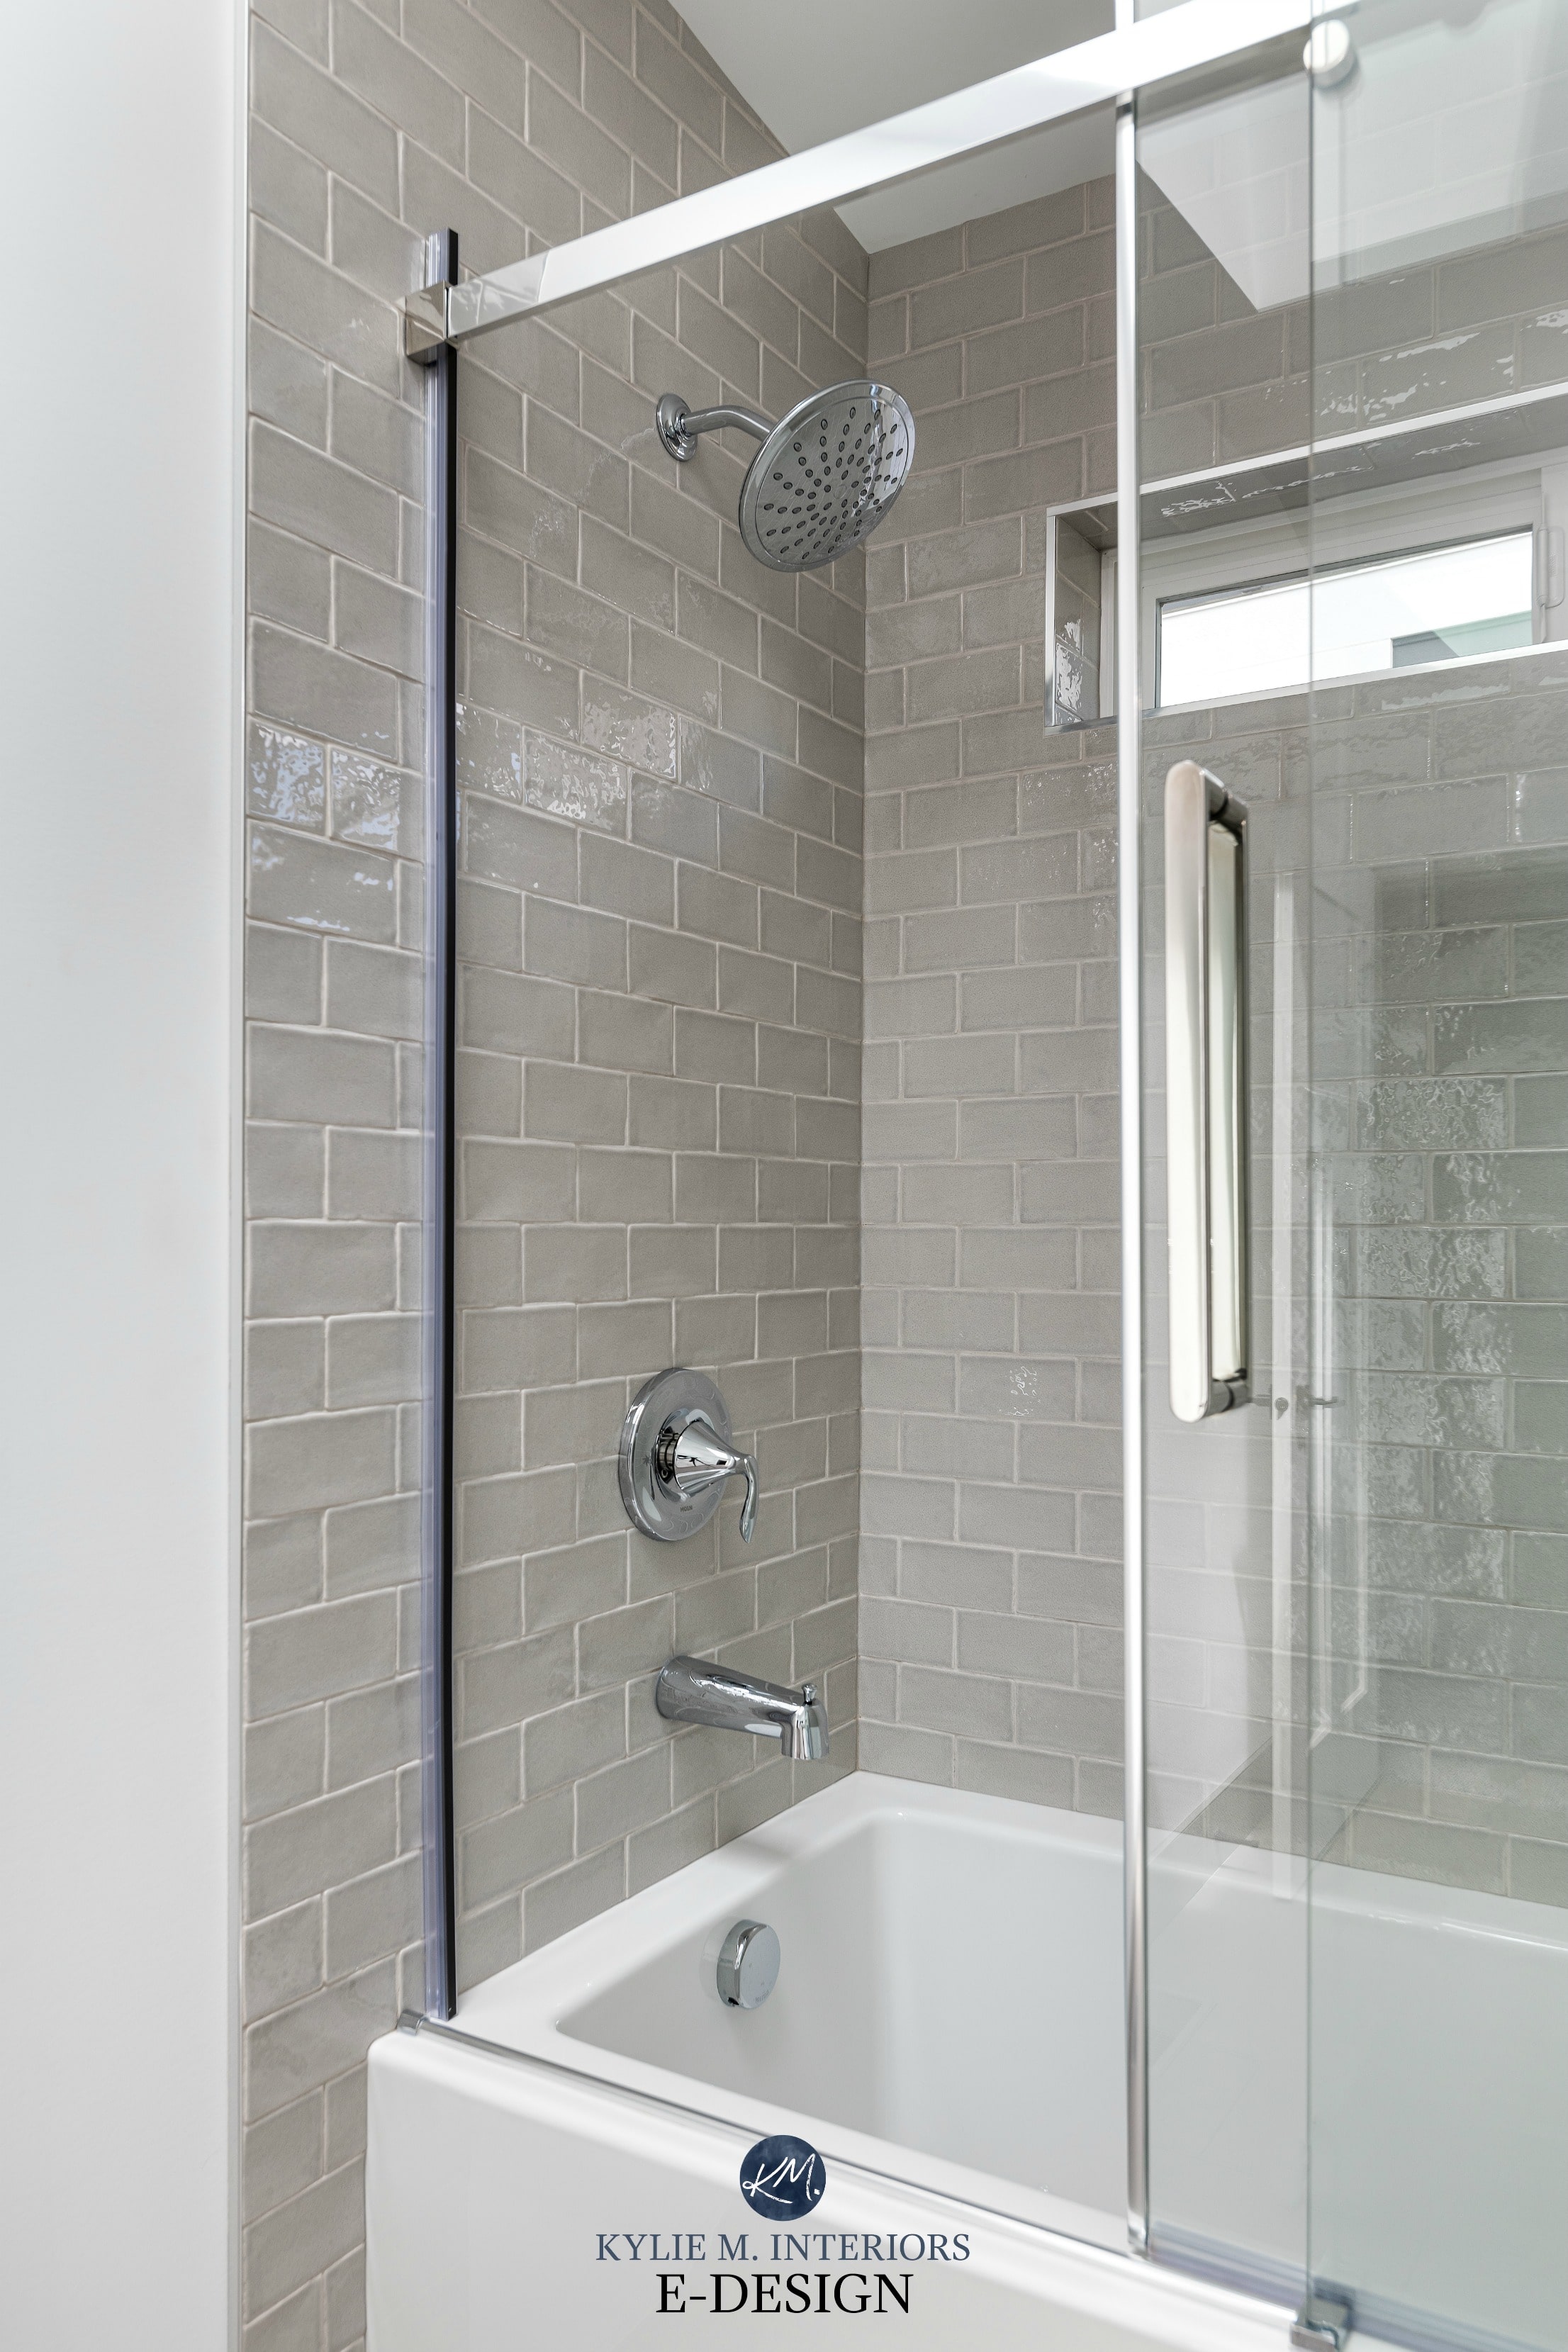 Bathroom, warm gray greige subway tile surround, light gray grout. Tub and shower with glass sliding door. Kylie M Interiors, E-design online paint colour consulting blog